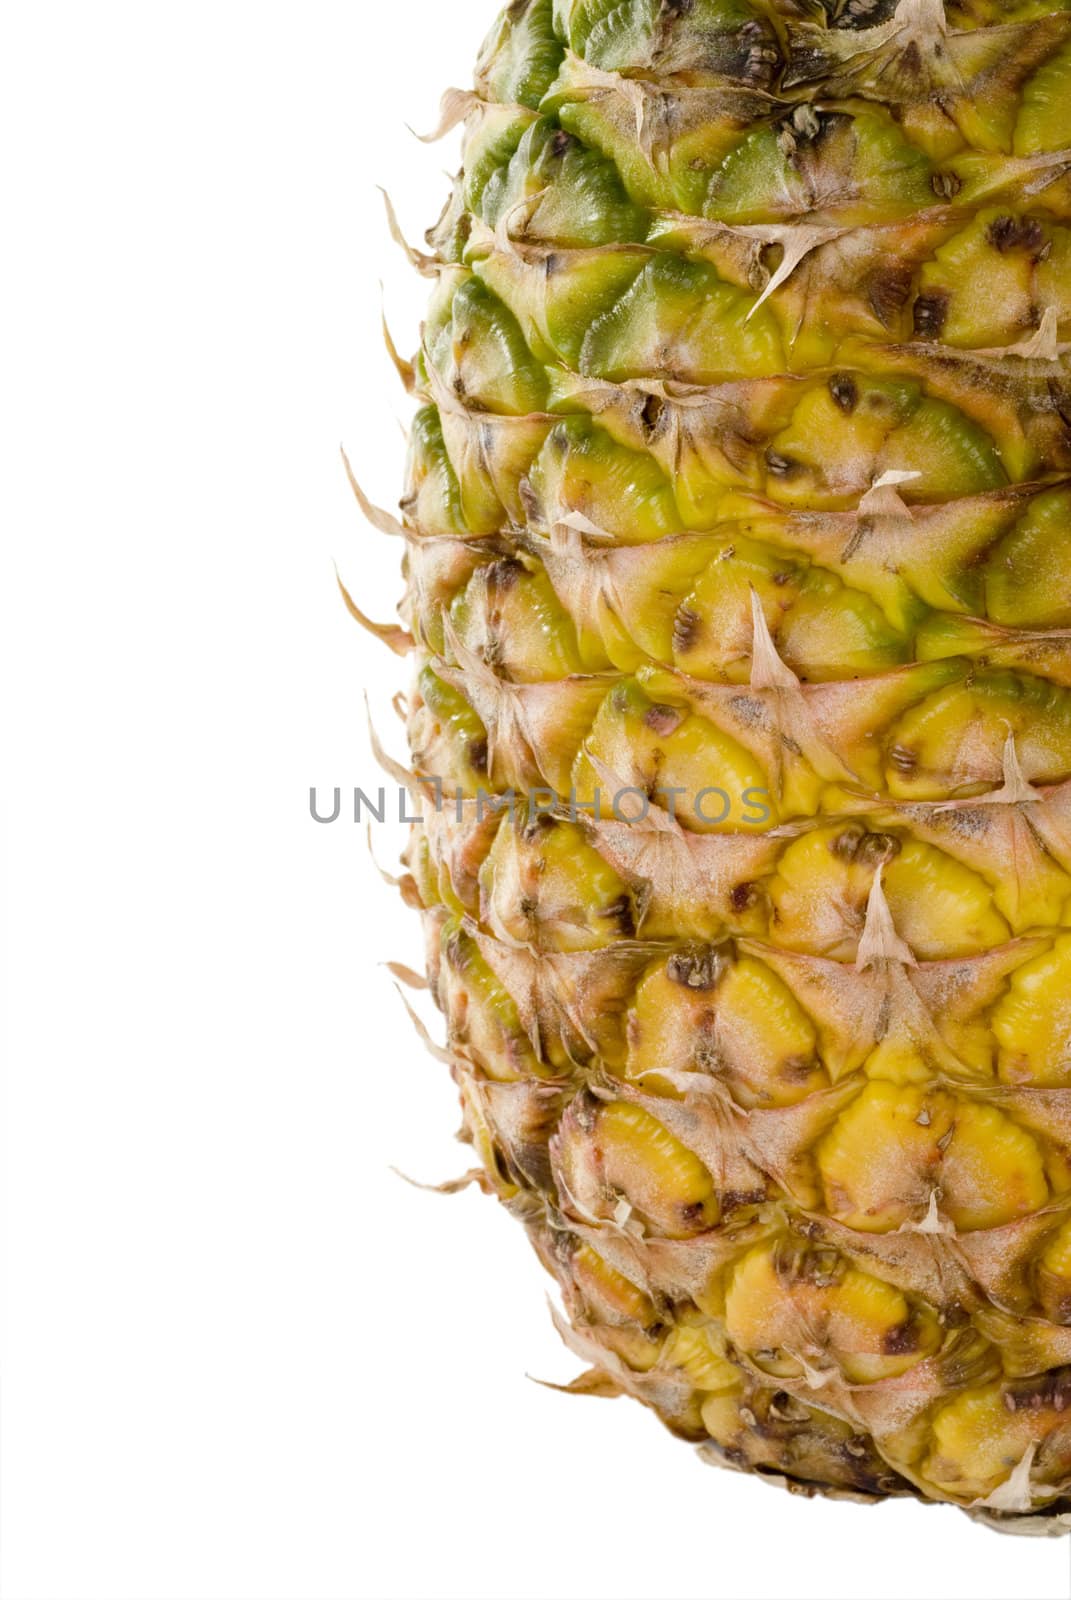 Pineapple by eugenef